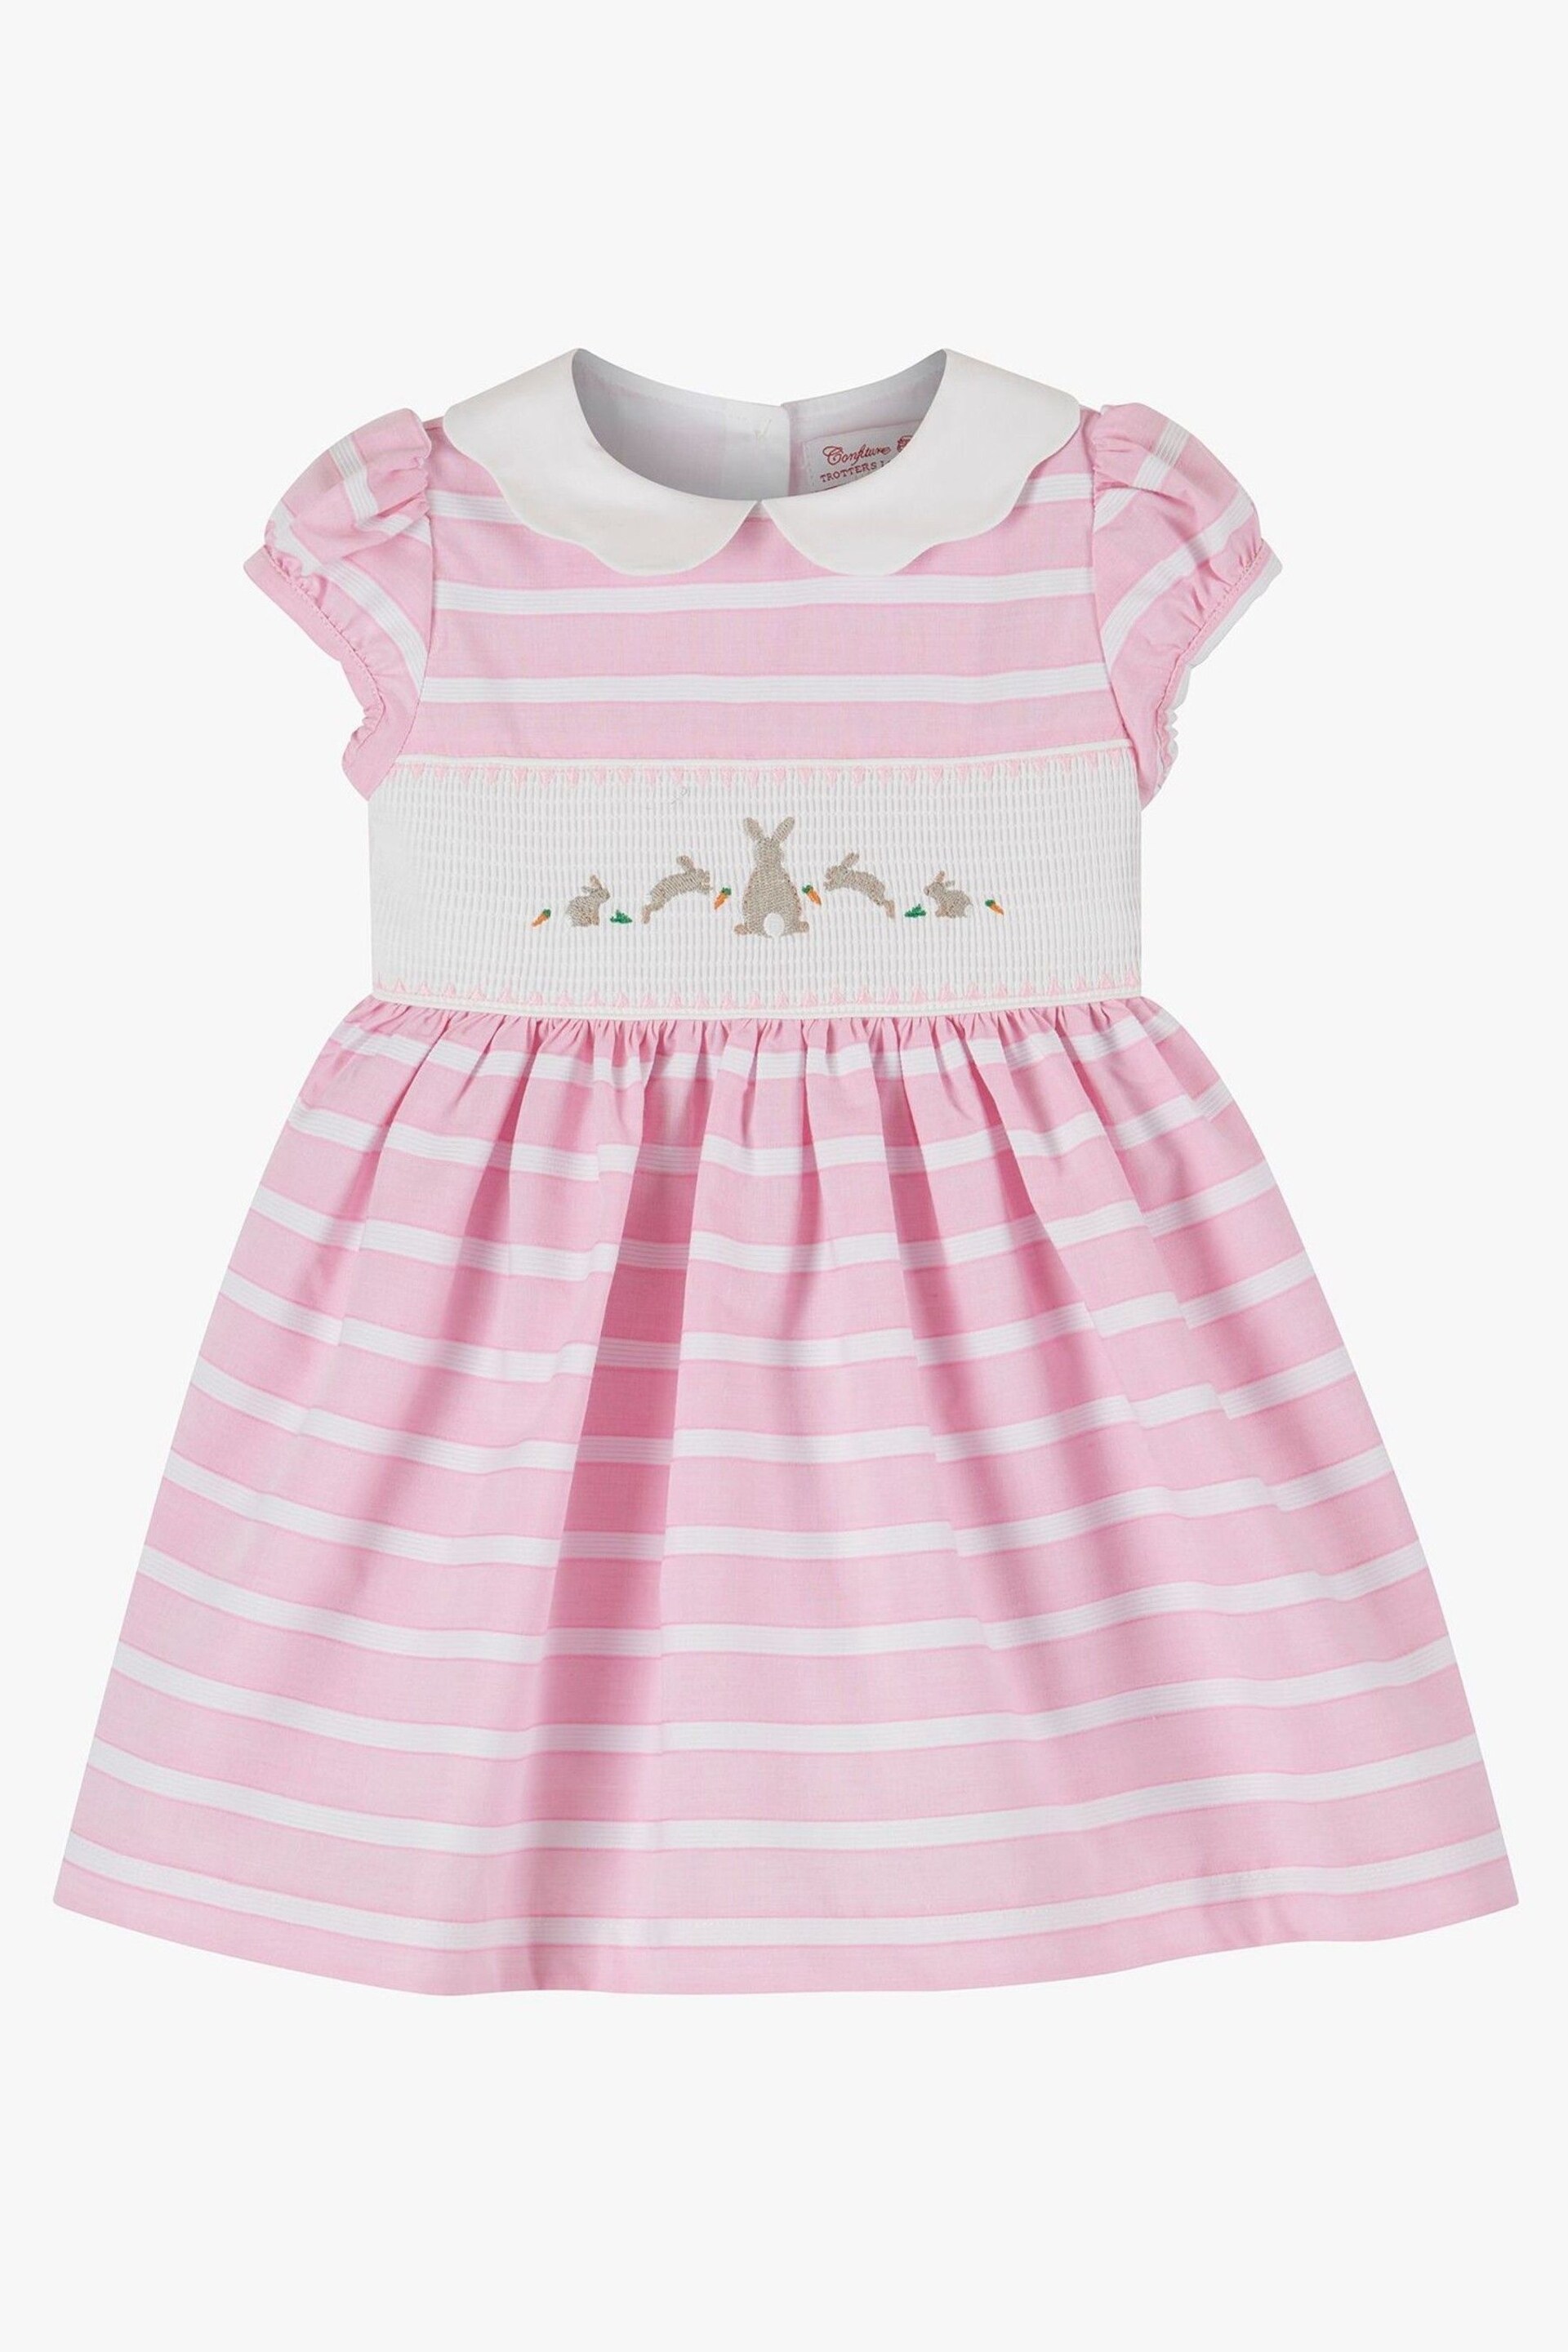 Trotters London Little Pink Bunny Striped Smocked Dress - Image 3 of 5